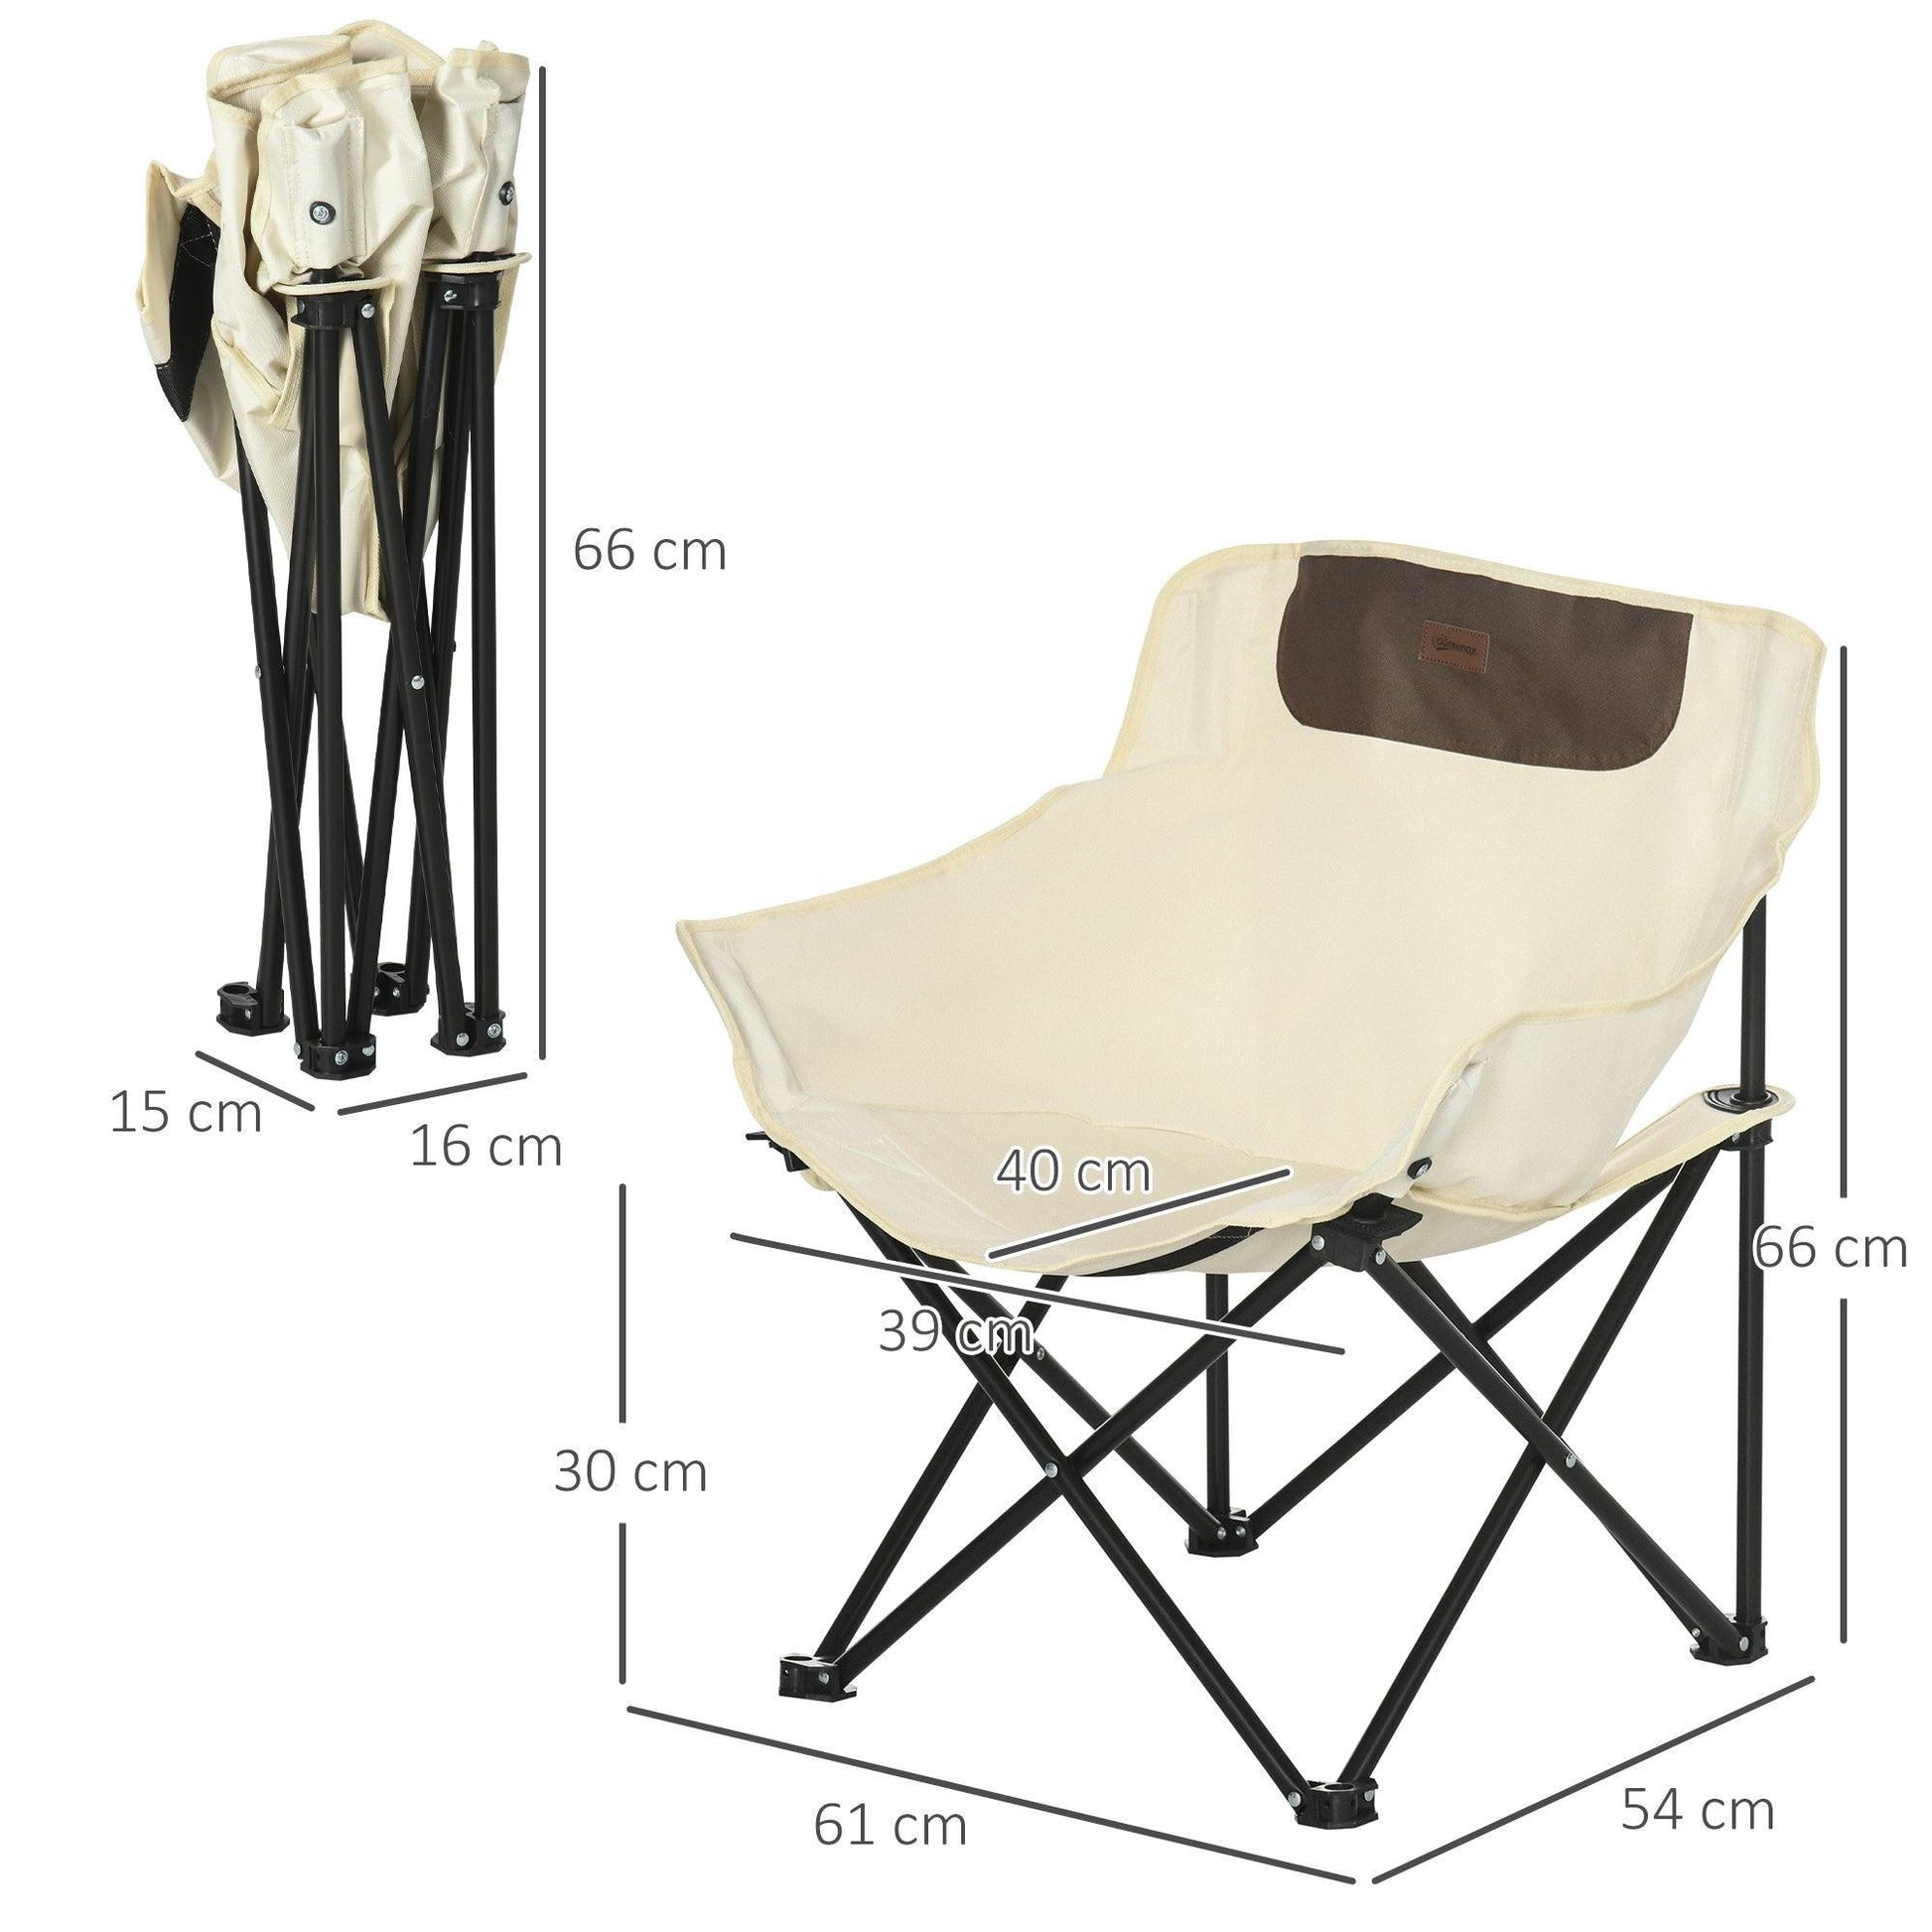 Outsunny Lightweight & Portable Camping Chair for Outdoor - ALL4U RETAILER LTD